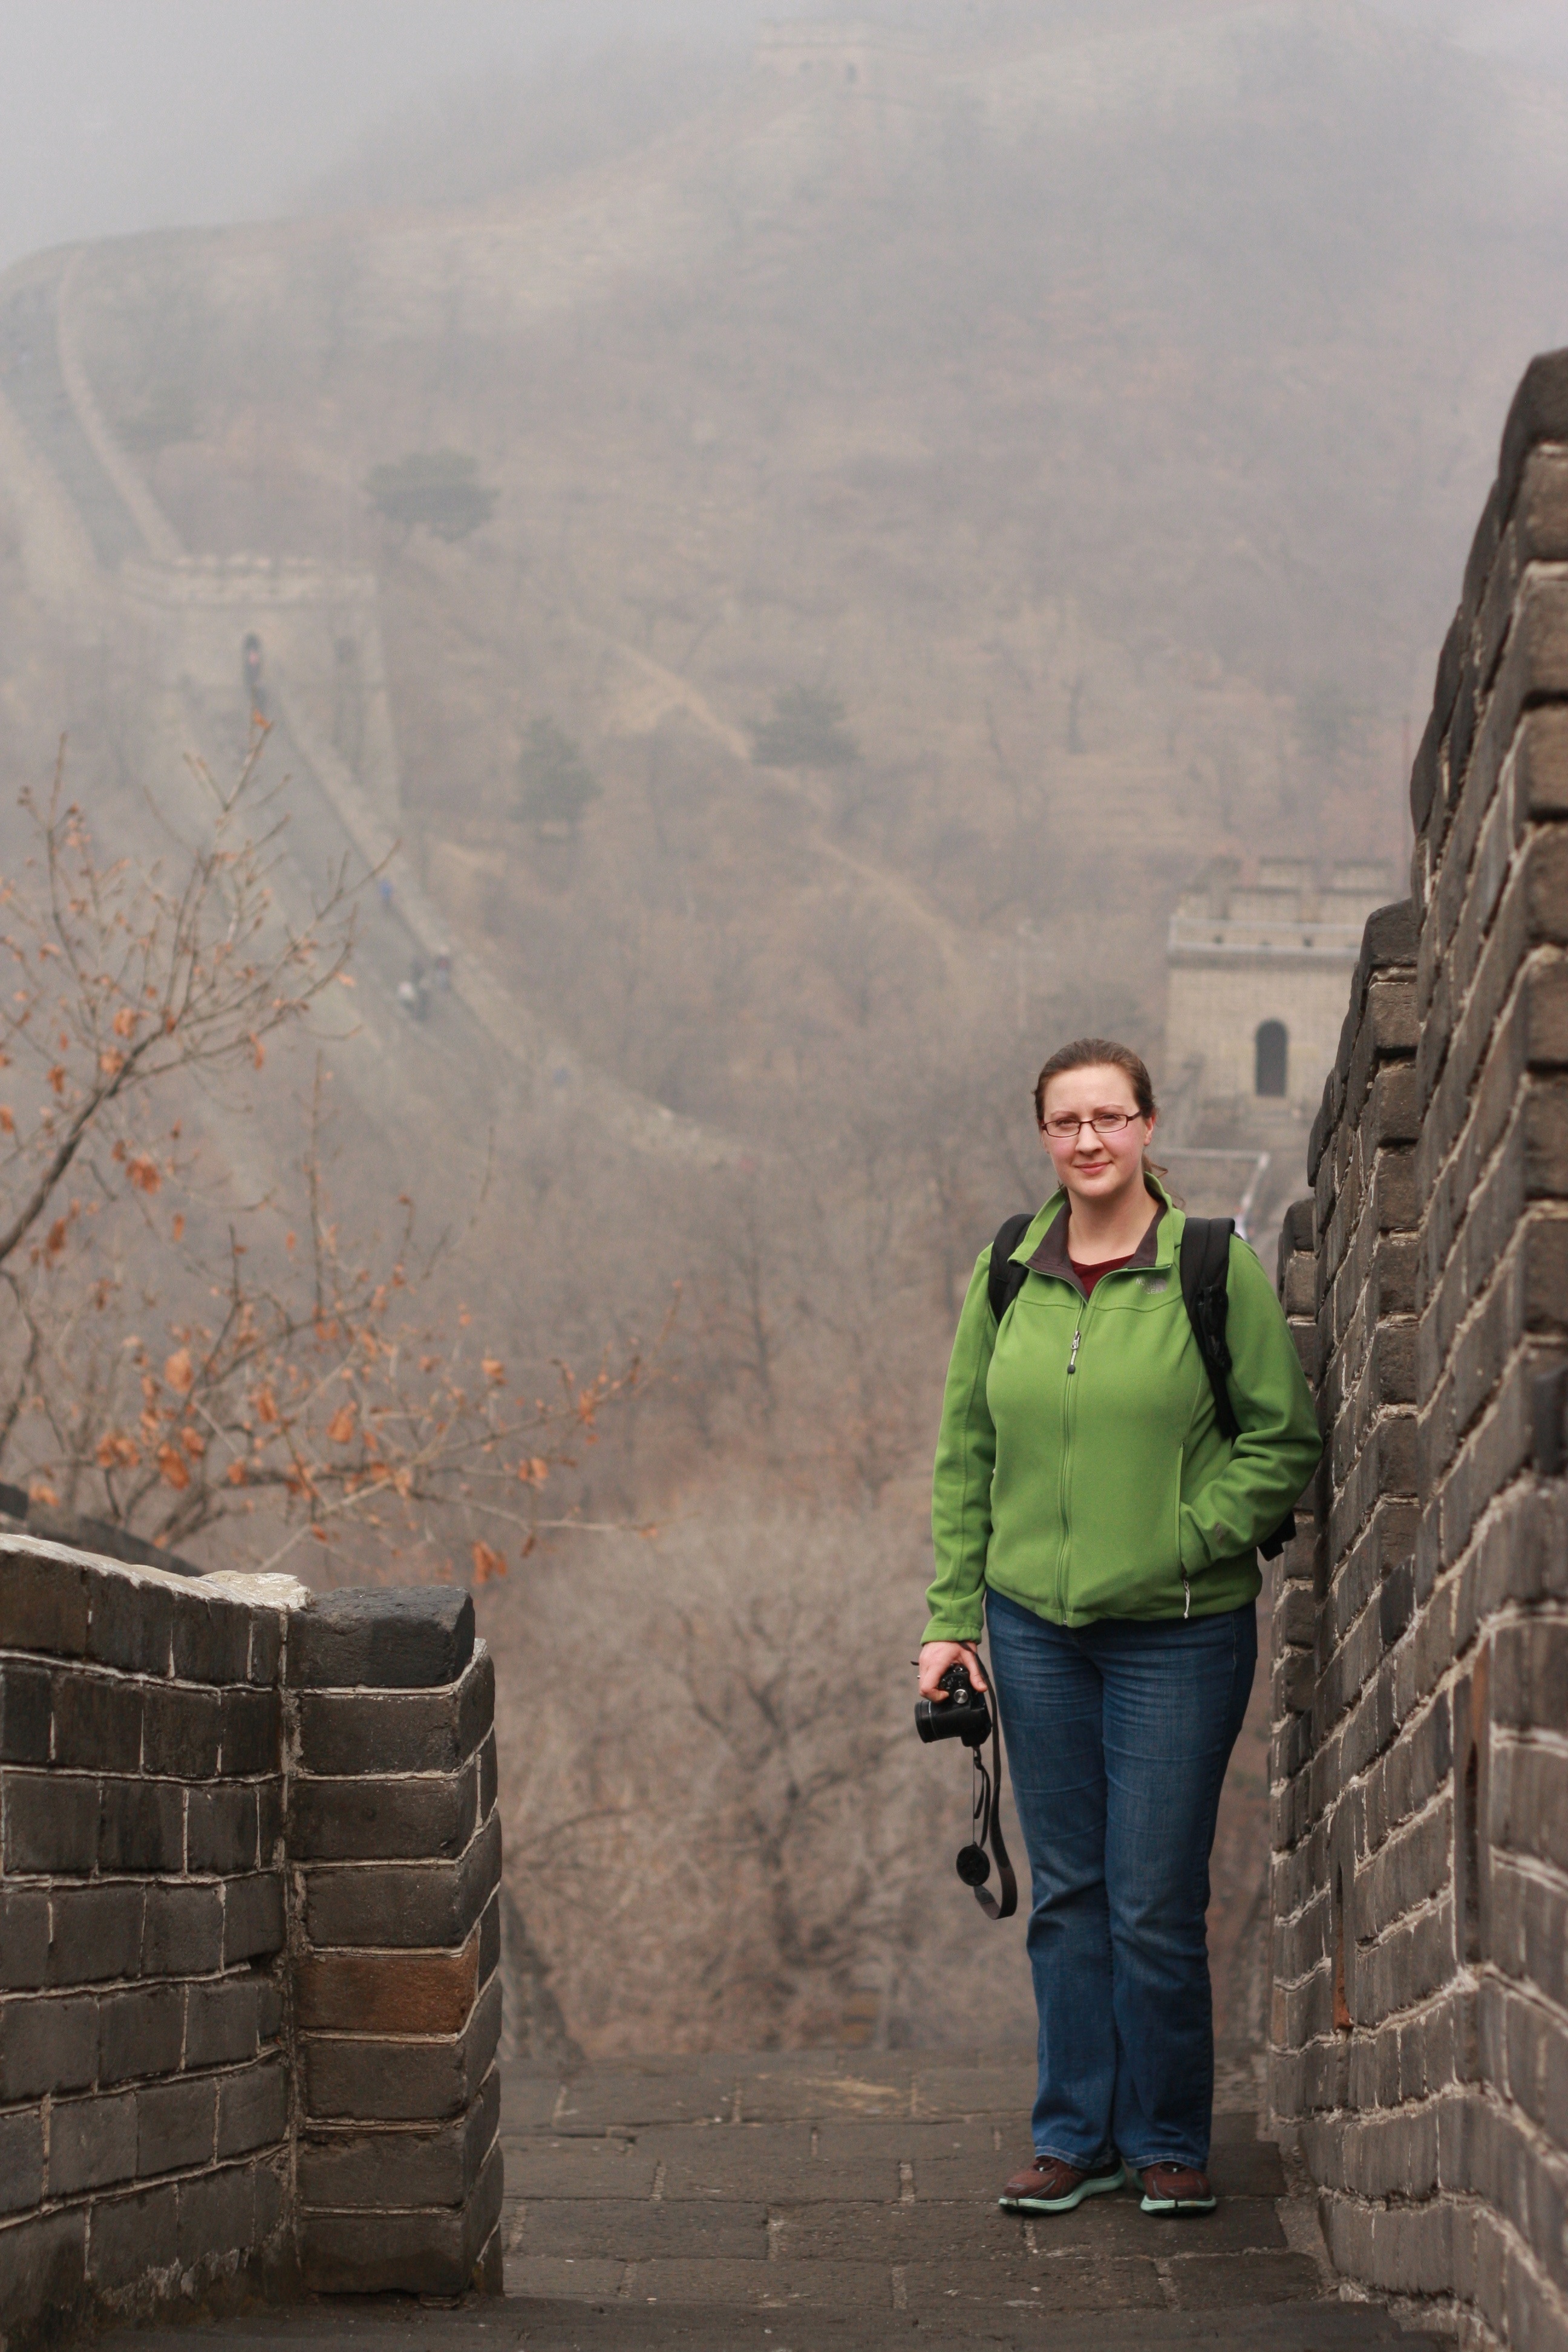 Danielle Williams standing on China’s Great Wall.